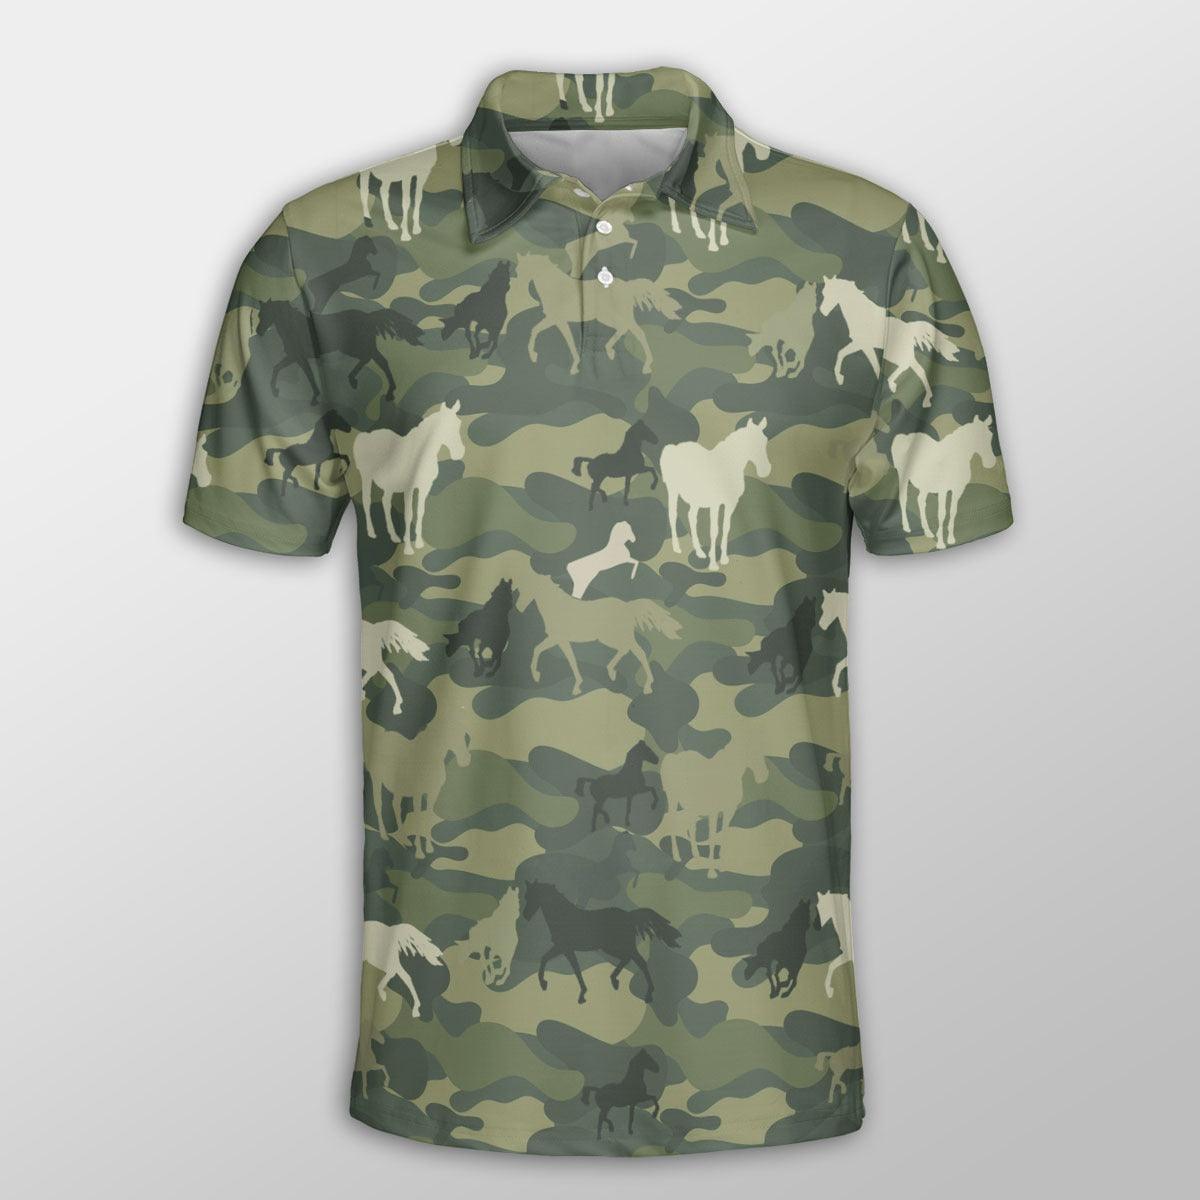 Horse Men Polo Shirts For Summer - Horse Camo Pattern Button Shirts For Men - Perfect Gift For Horse Lovers, Cattle Lovers - Amzanimalsgift